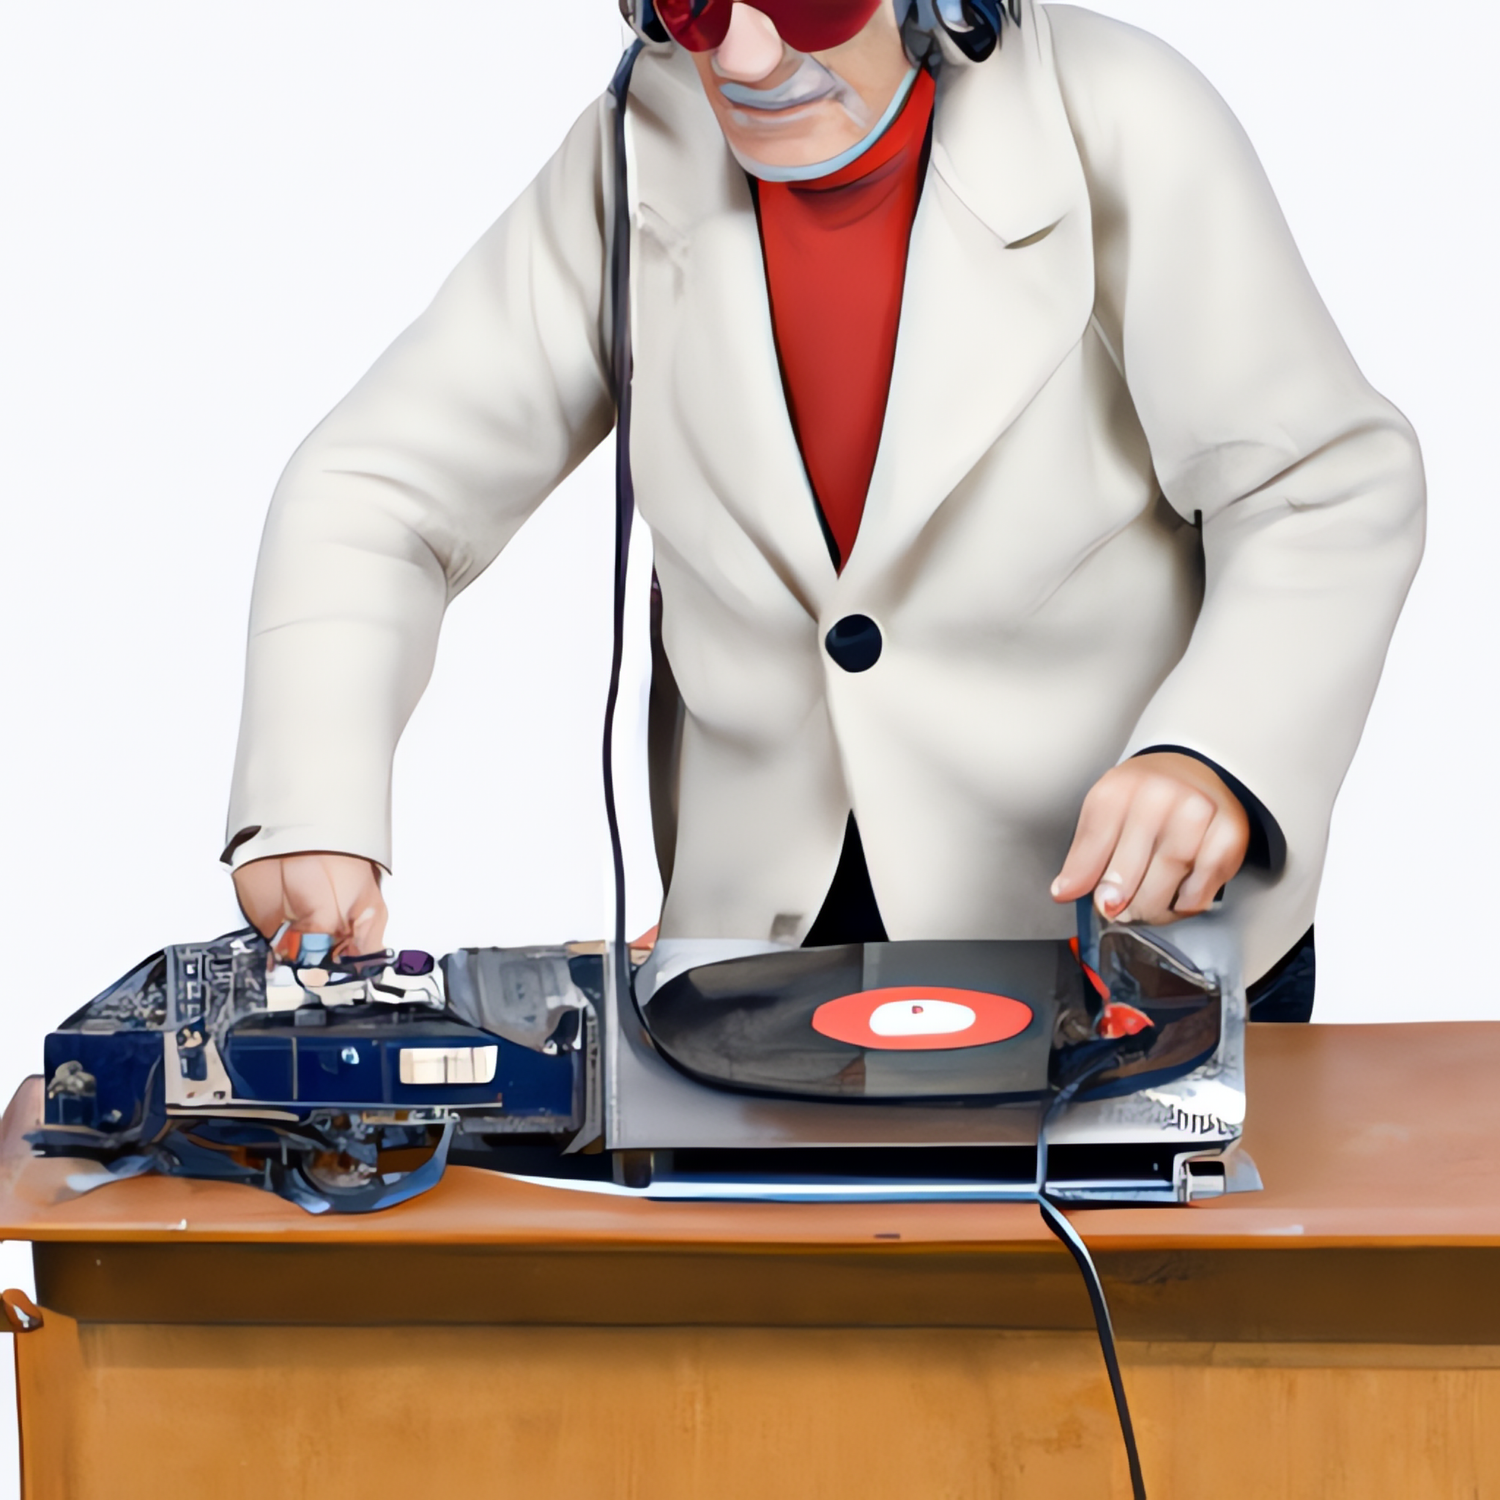 Am I Too Old to be a DJ?